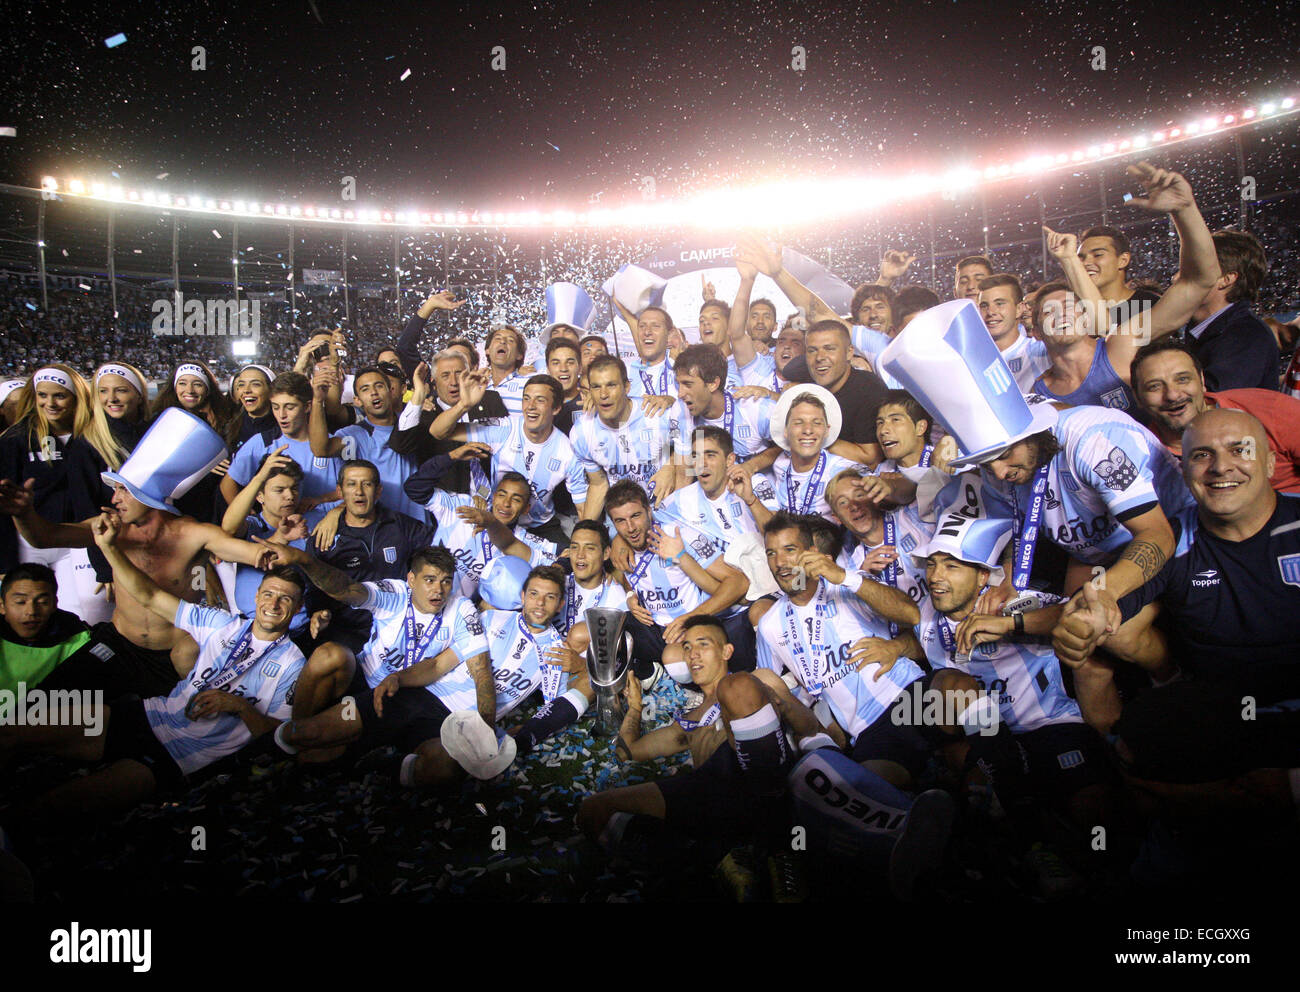 Avellaneda, Argentina. 14th Dec, 2014. Players of Racing Club celebrate with the trophy at the end of the Final match against Godoy Cruz of Argentinean Soccer First Division at Presidente Peron Stadium, in Avellaneda City, 20km from Buenos Aires City, Argentina, on Dec. 14, 2014. © Martin Zabala/Xinhua/Alamy Live News Stock Photo